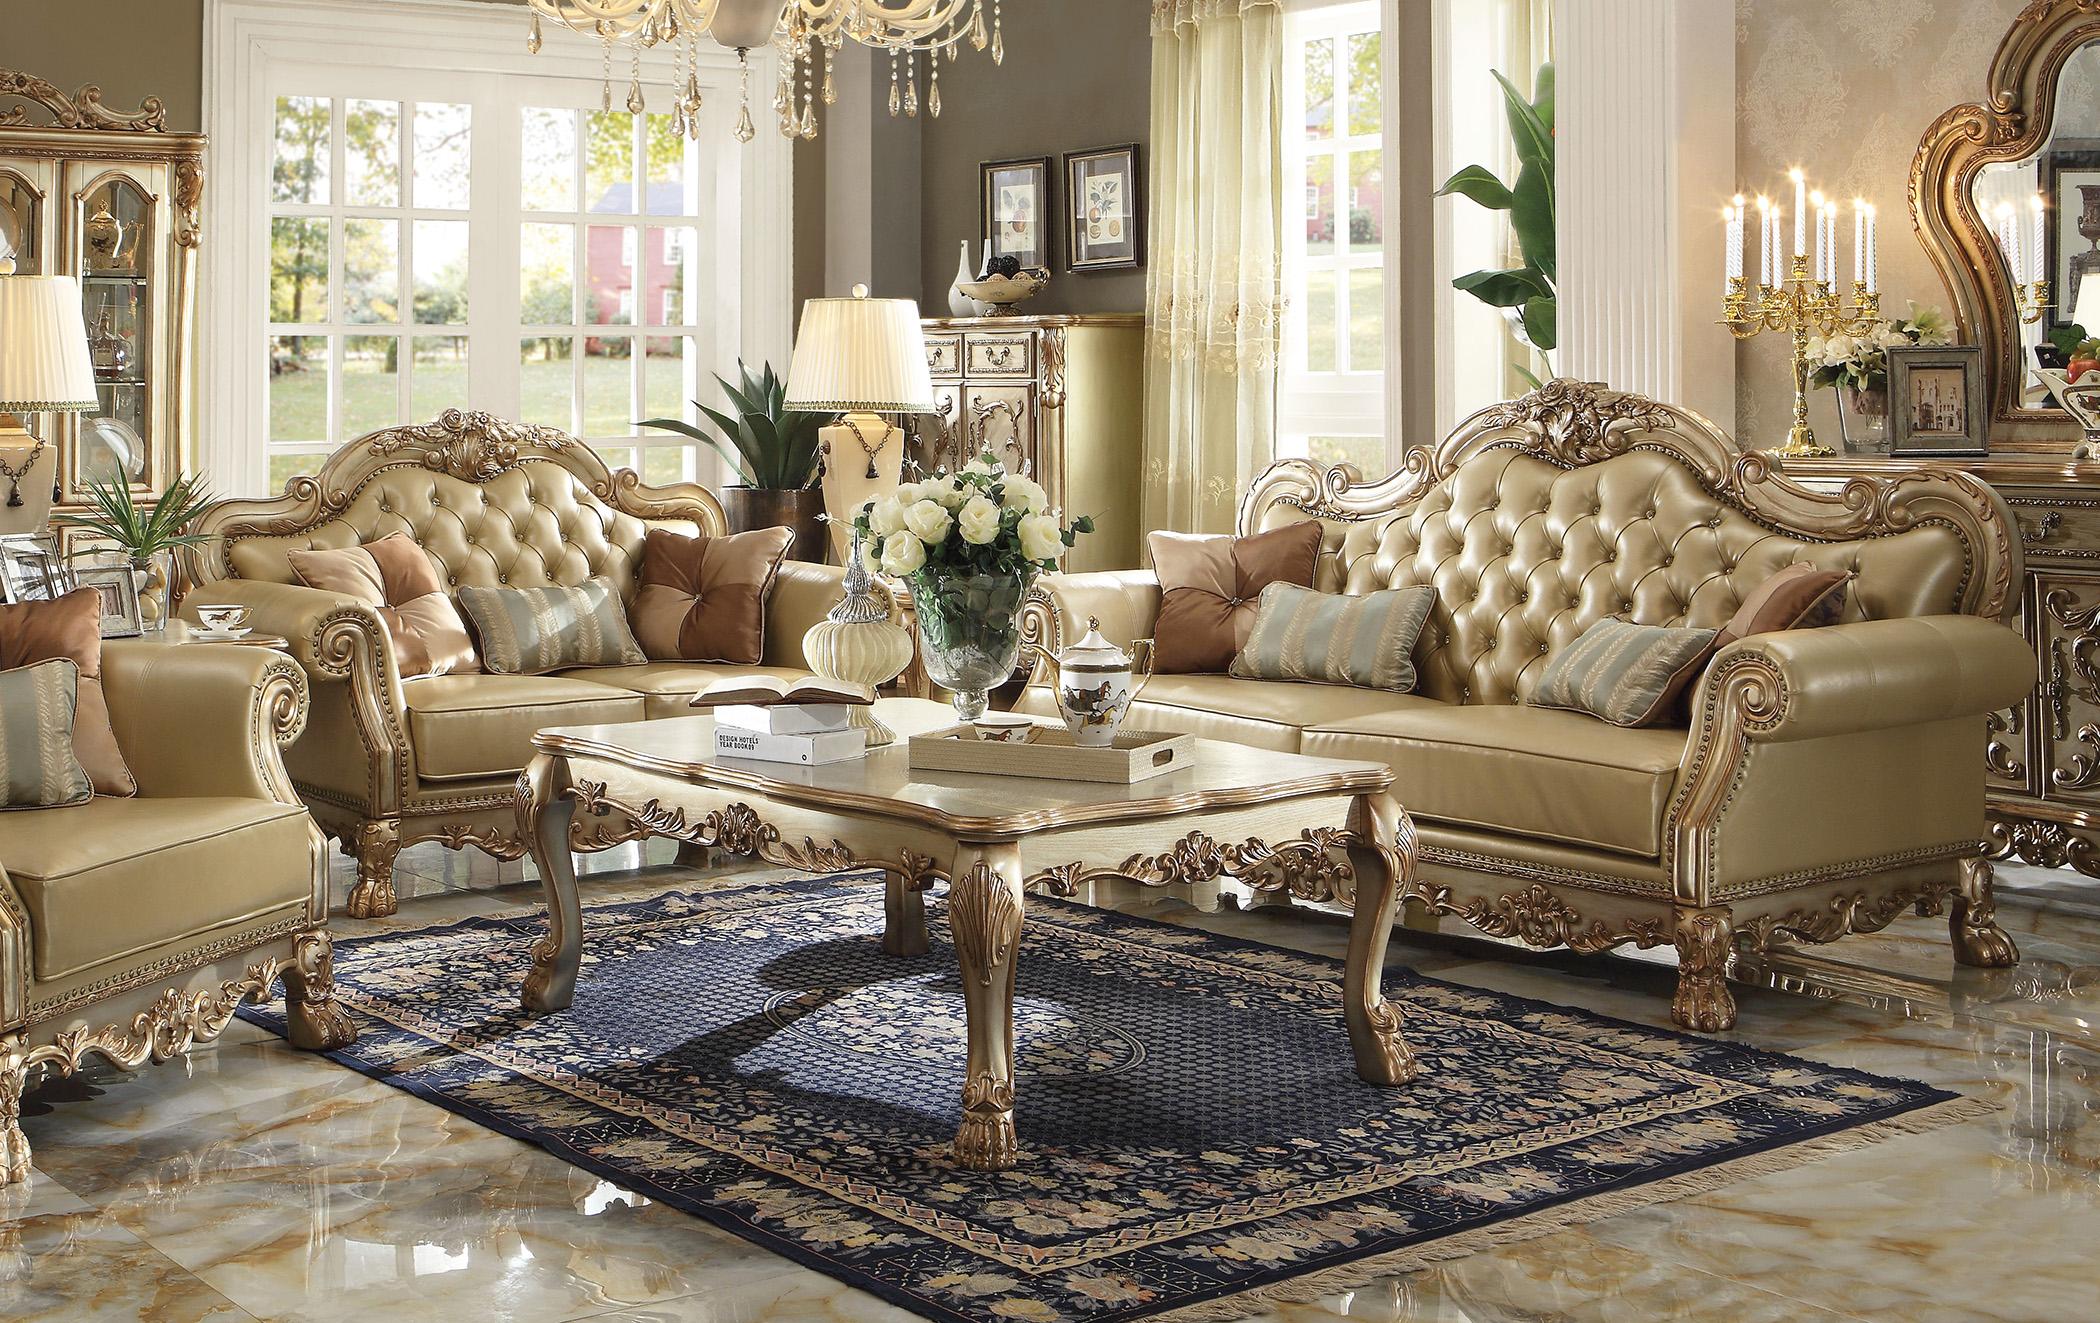 Traditional,  Vintage Sofa Loveseat Dresden-53160 Dresden-53160-Set-2 in Brown, Beige Faux Leather